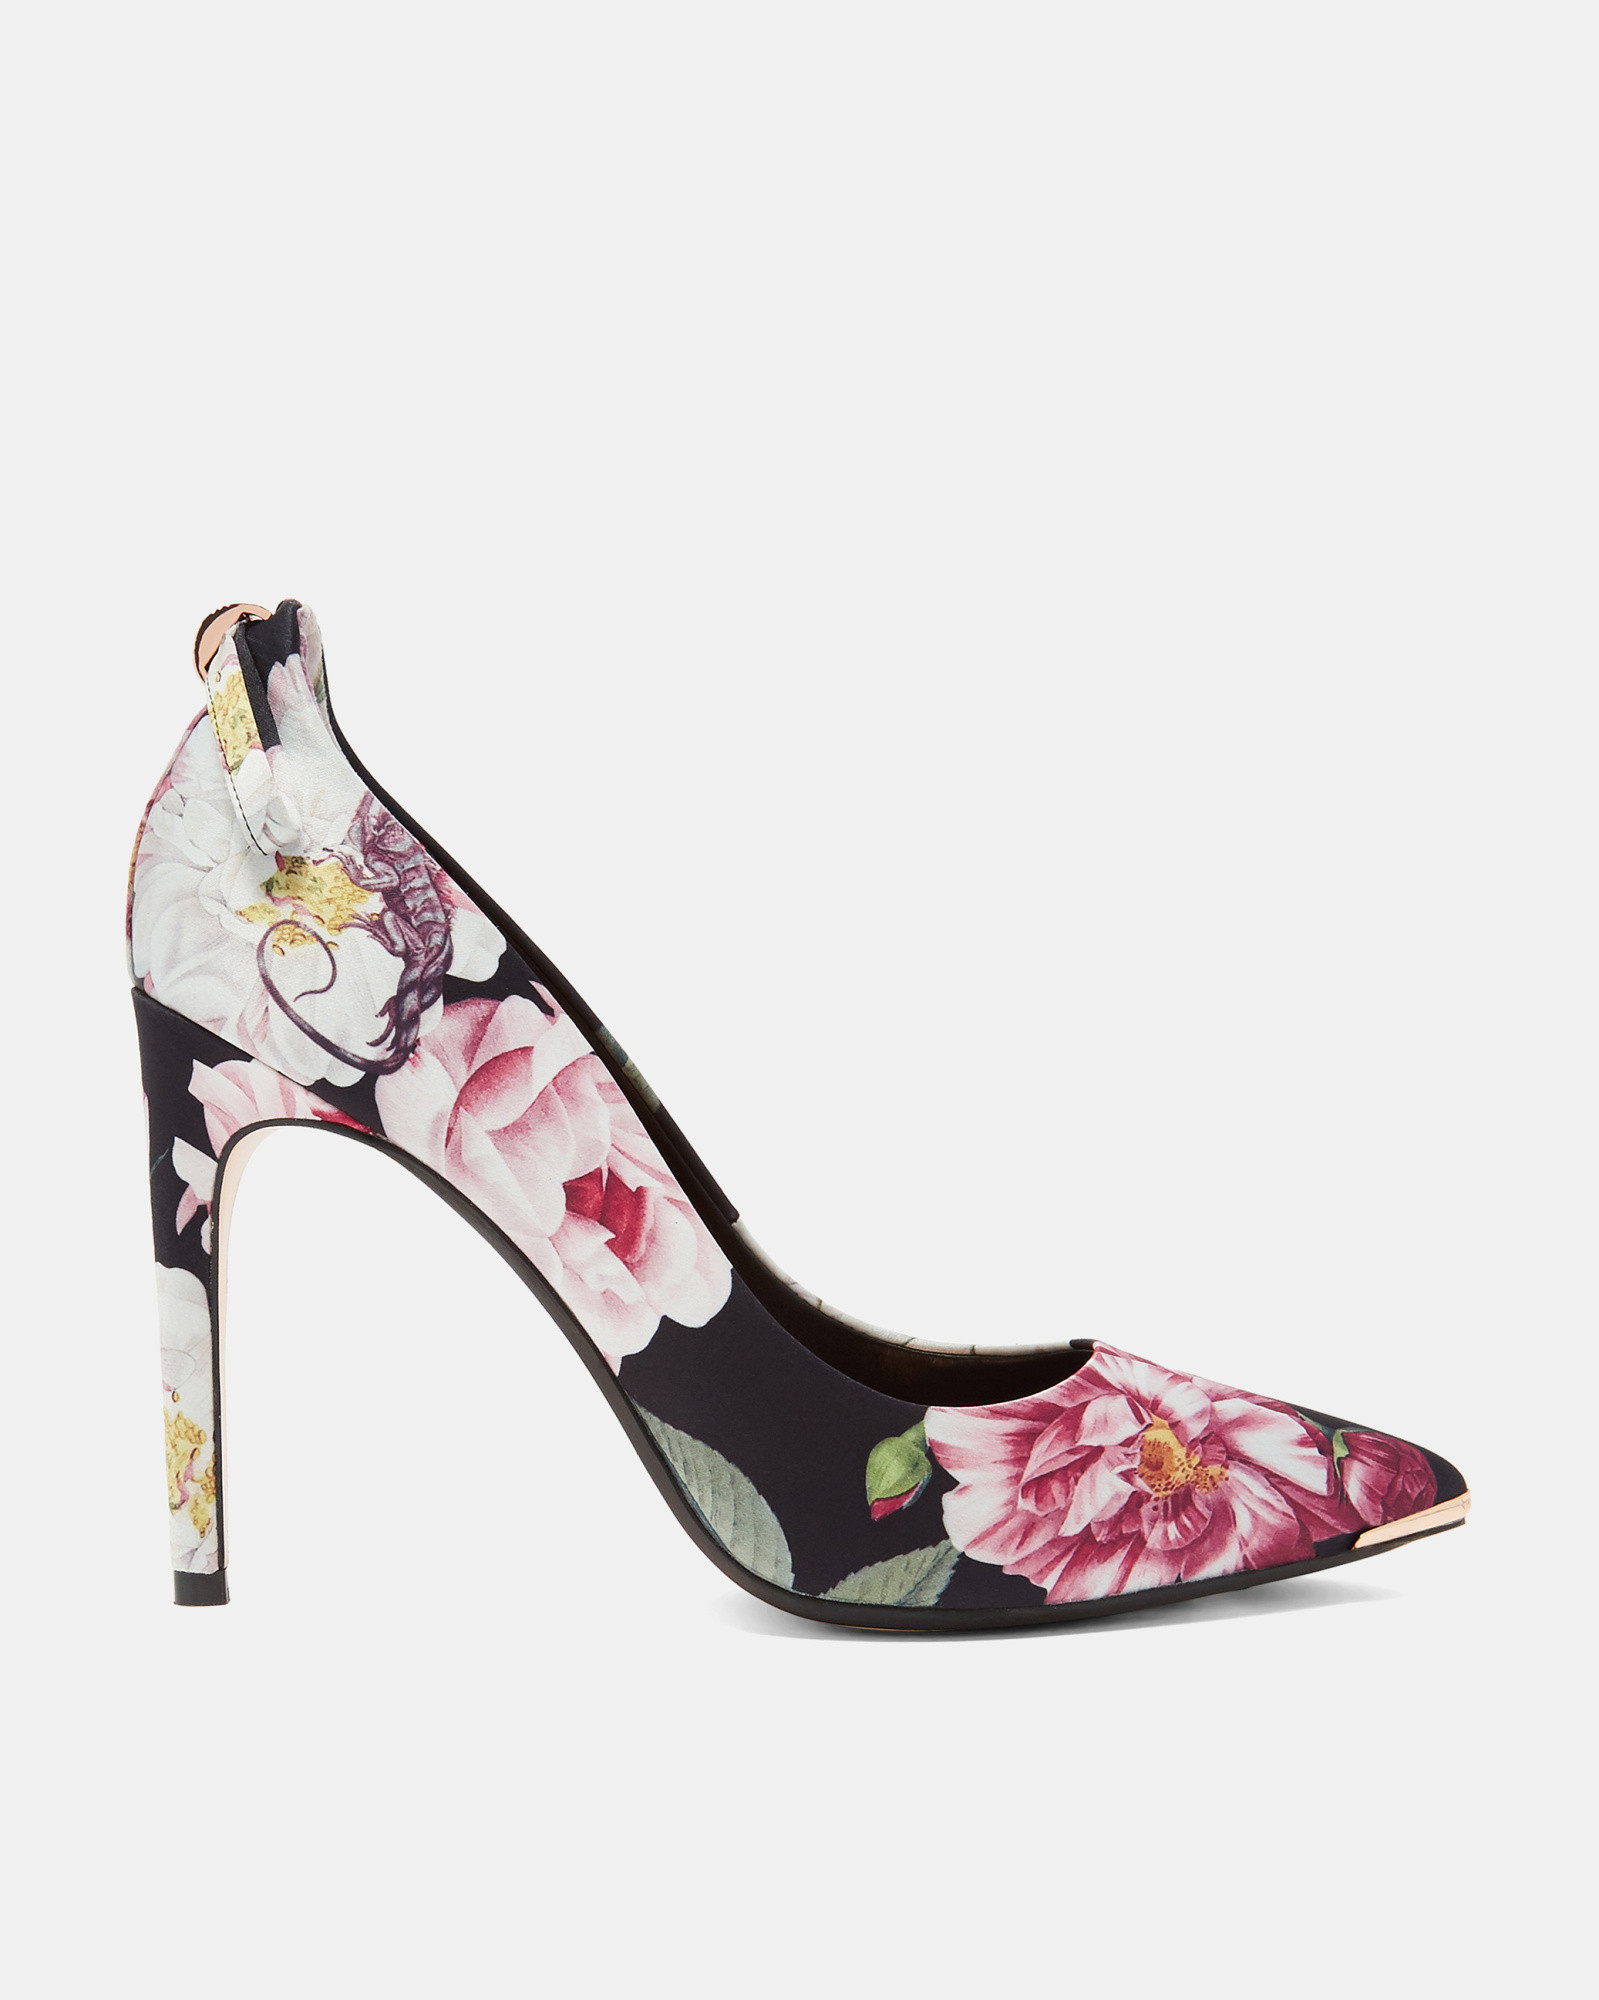 LIVLIAP Printed bow detail courts